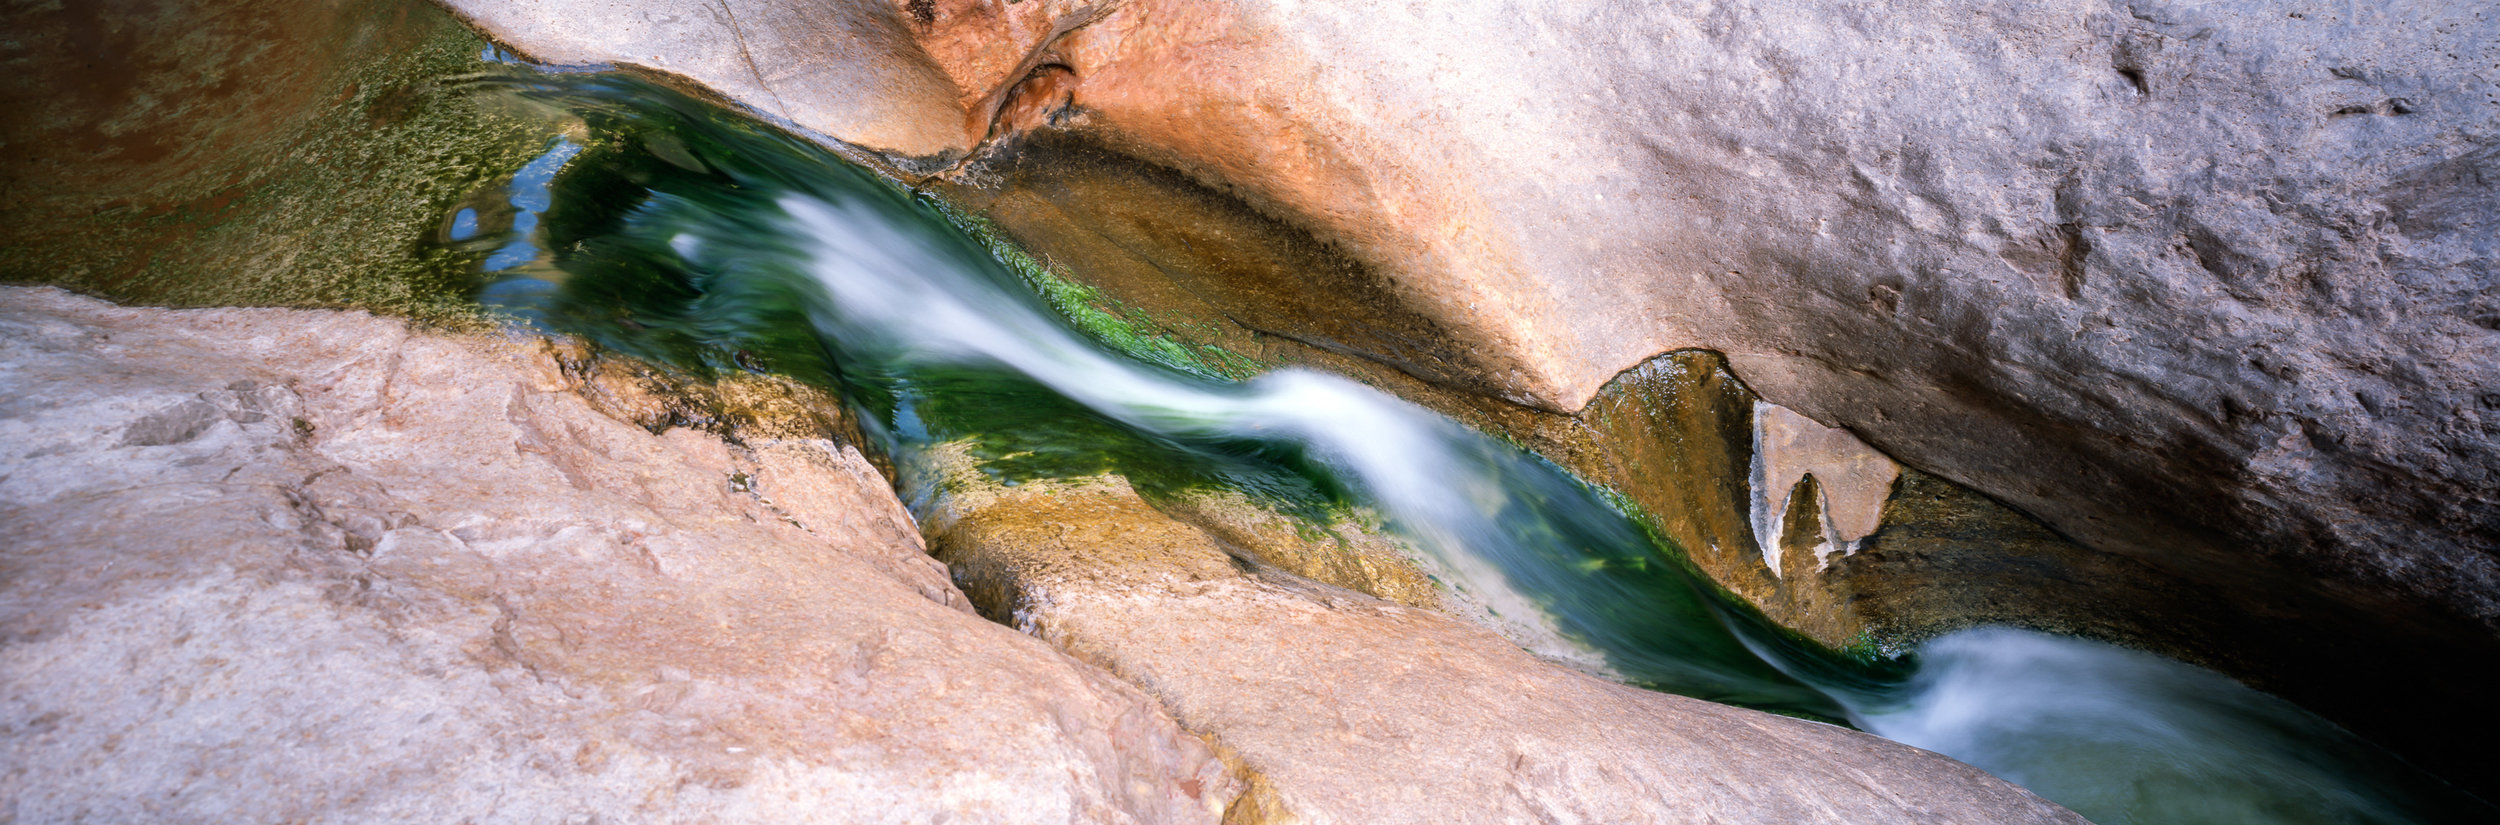  Waterfall in Scotty's Hollow. Velvia 50, 1sec, f/18. 